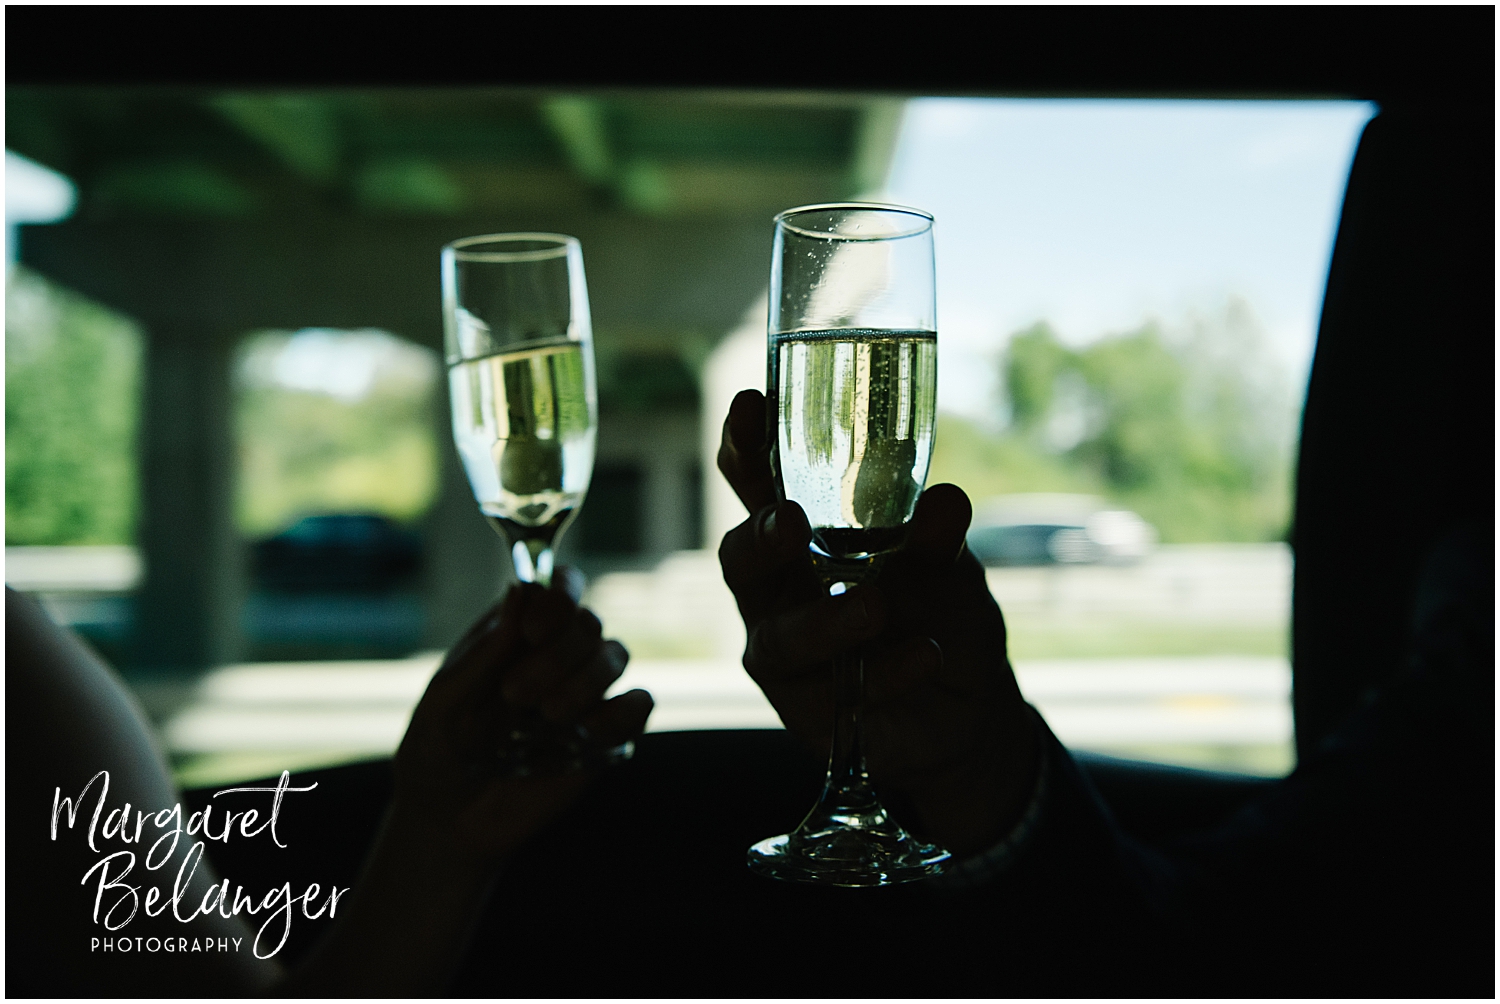 Two people toasting with champagne flutes inside a limousine.